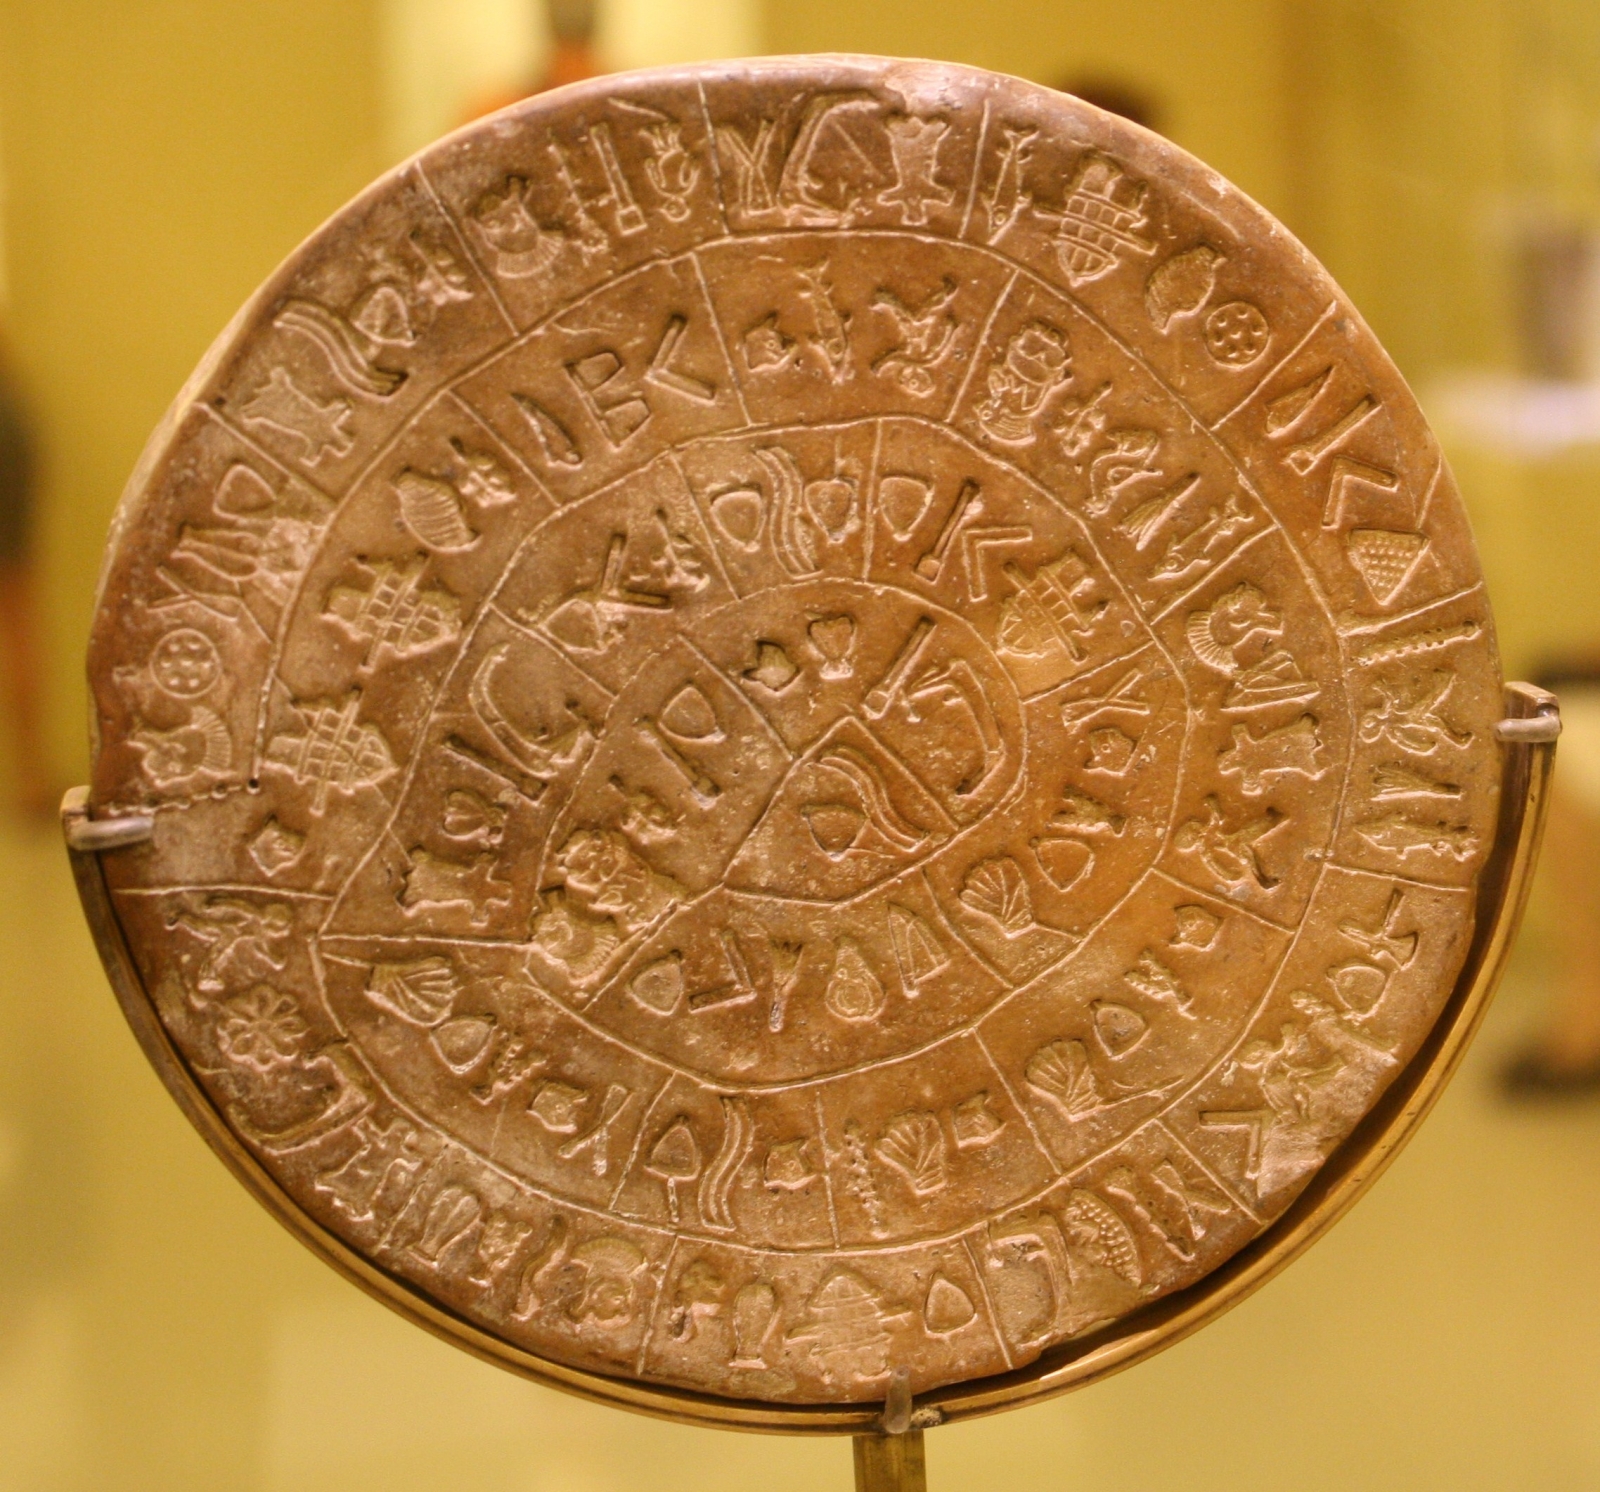 The Phaistos disk is the earliest form of printing in the world